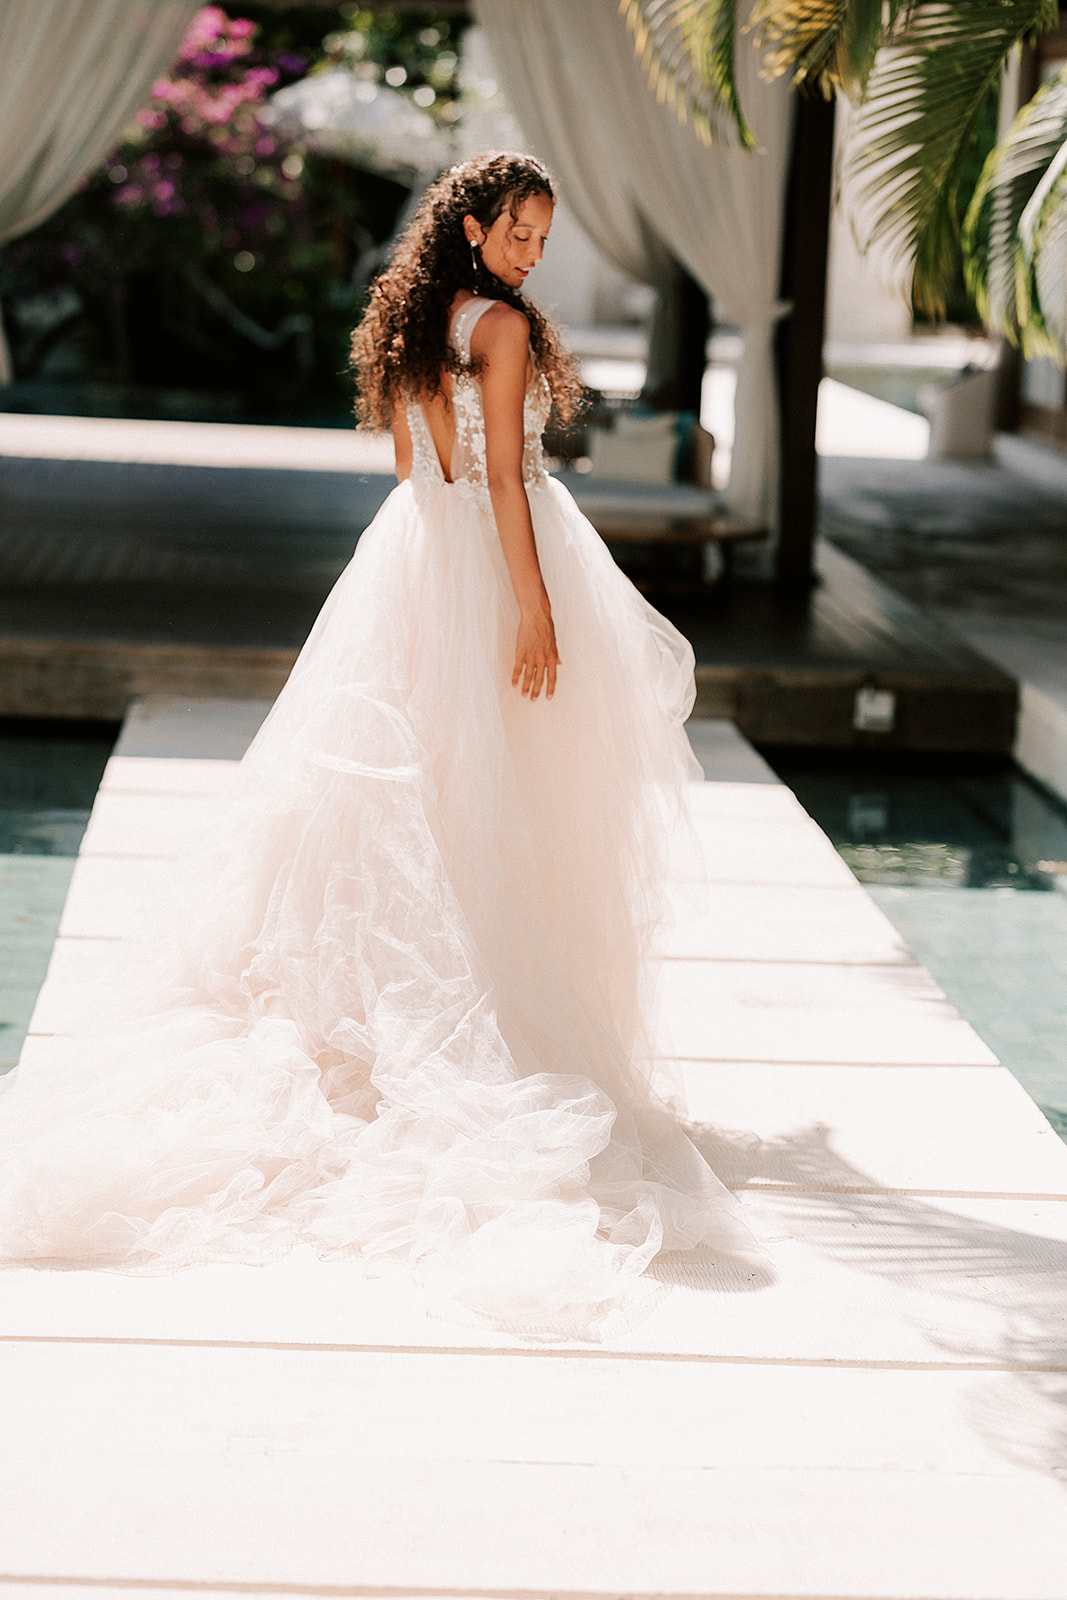 bride is walking down a white paved area next to a pool at luxury venue in Bali